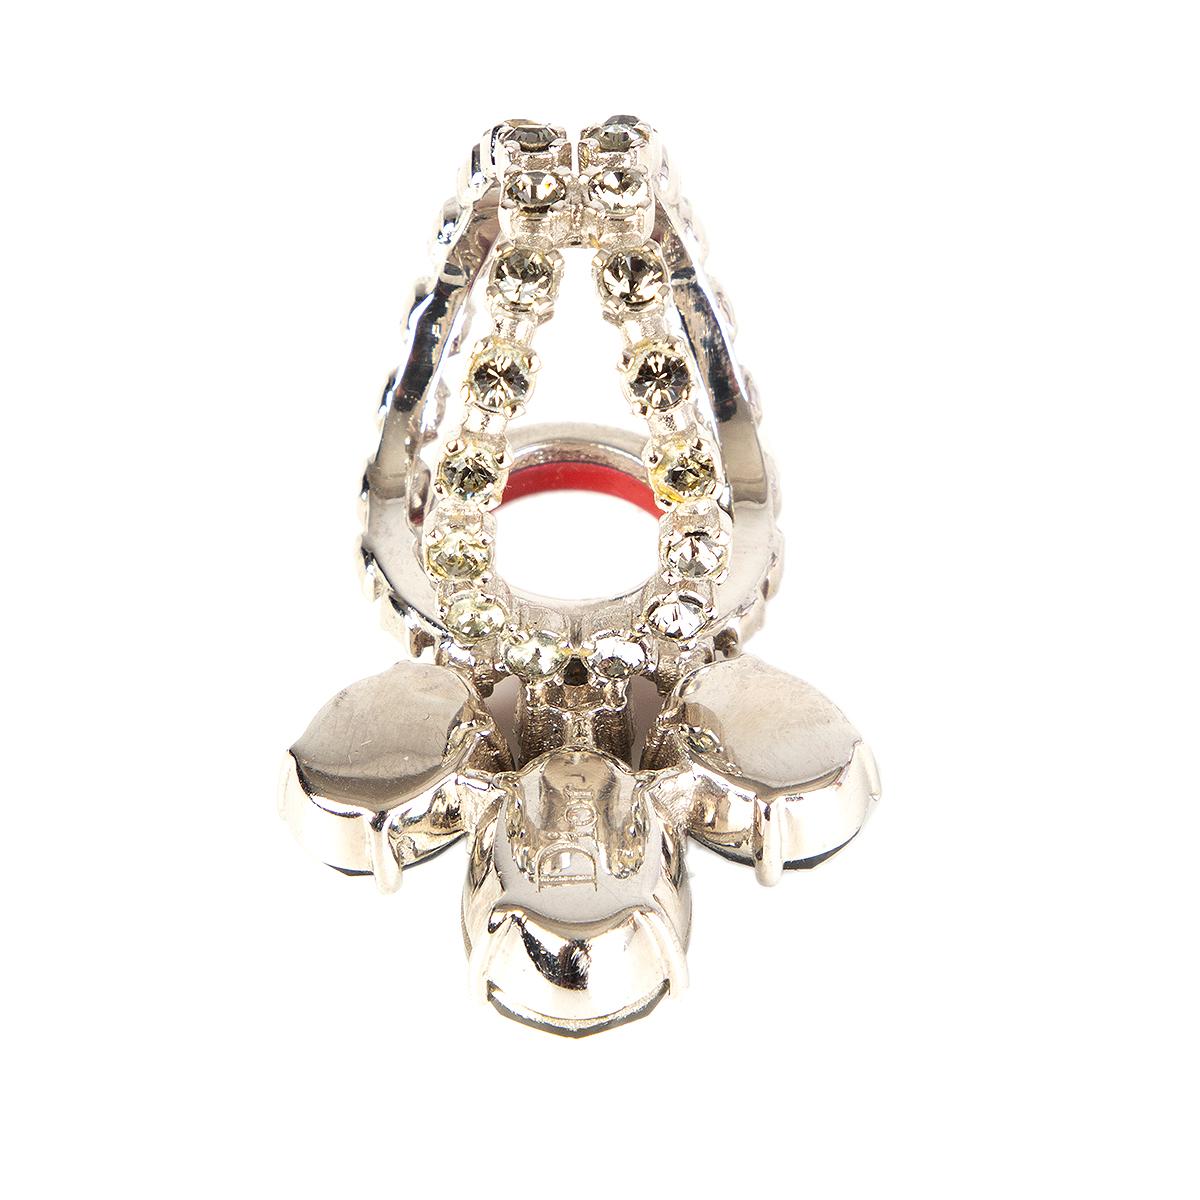 Christian Dior silver-tone metal ring embellished with light sage green crystals and a red enamel ring. Has been worn and is in excellent condition. 

Tag Size L / 6
Width 4cm (1.6in)
Height 2.5cm (1in)
Hardware Silver-Tone Metal/Enamel